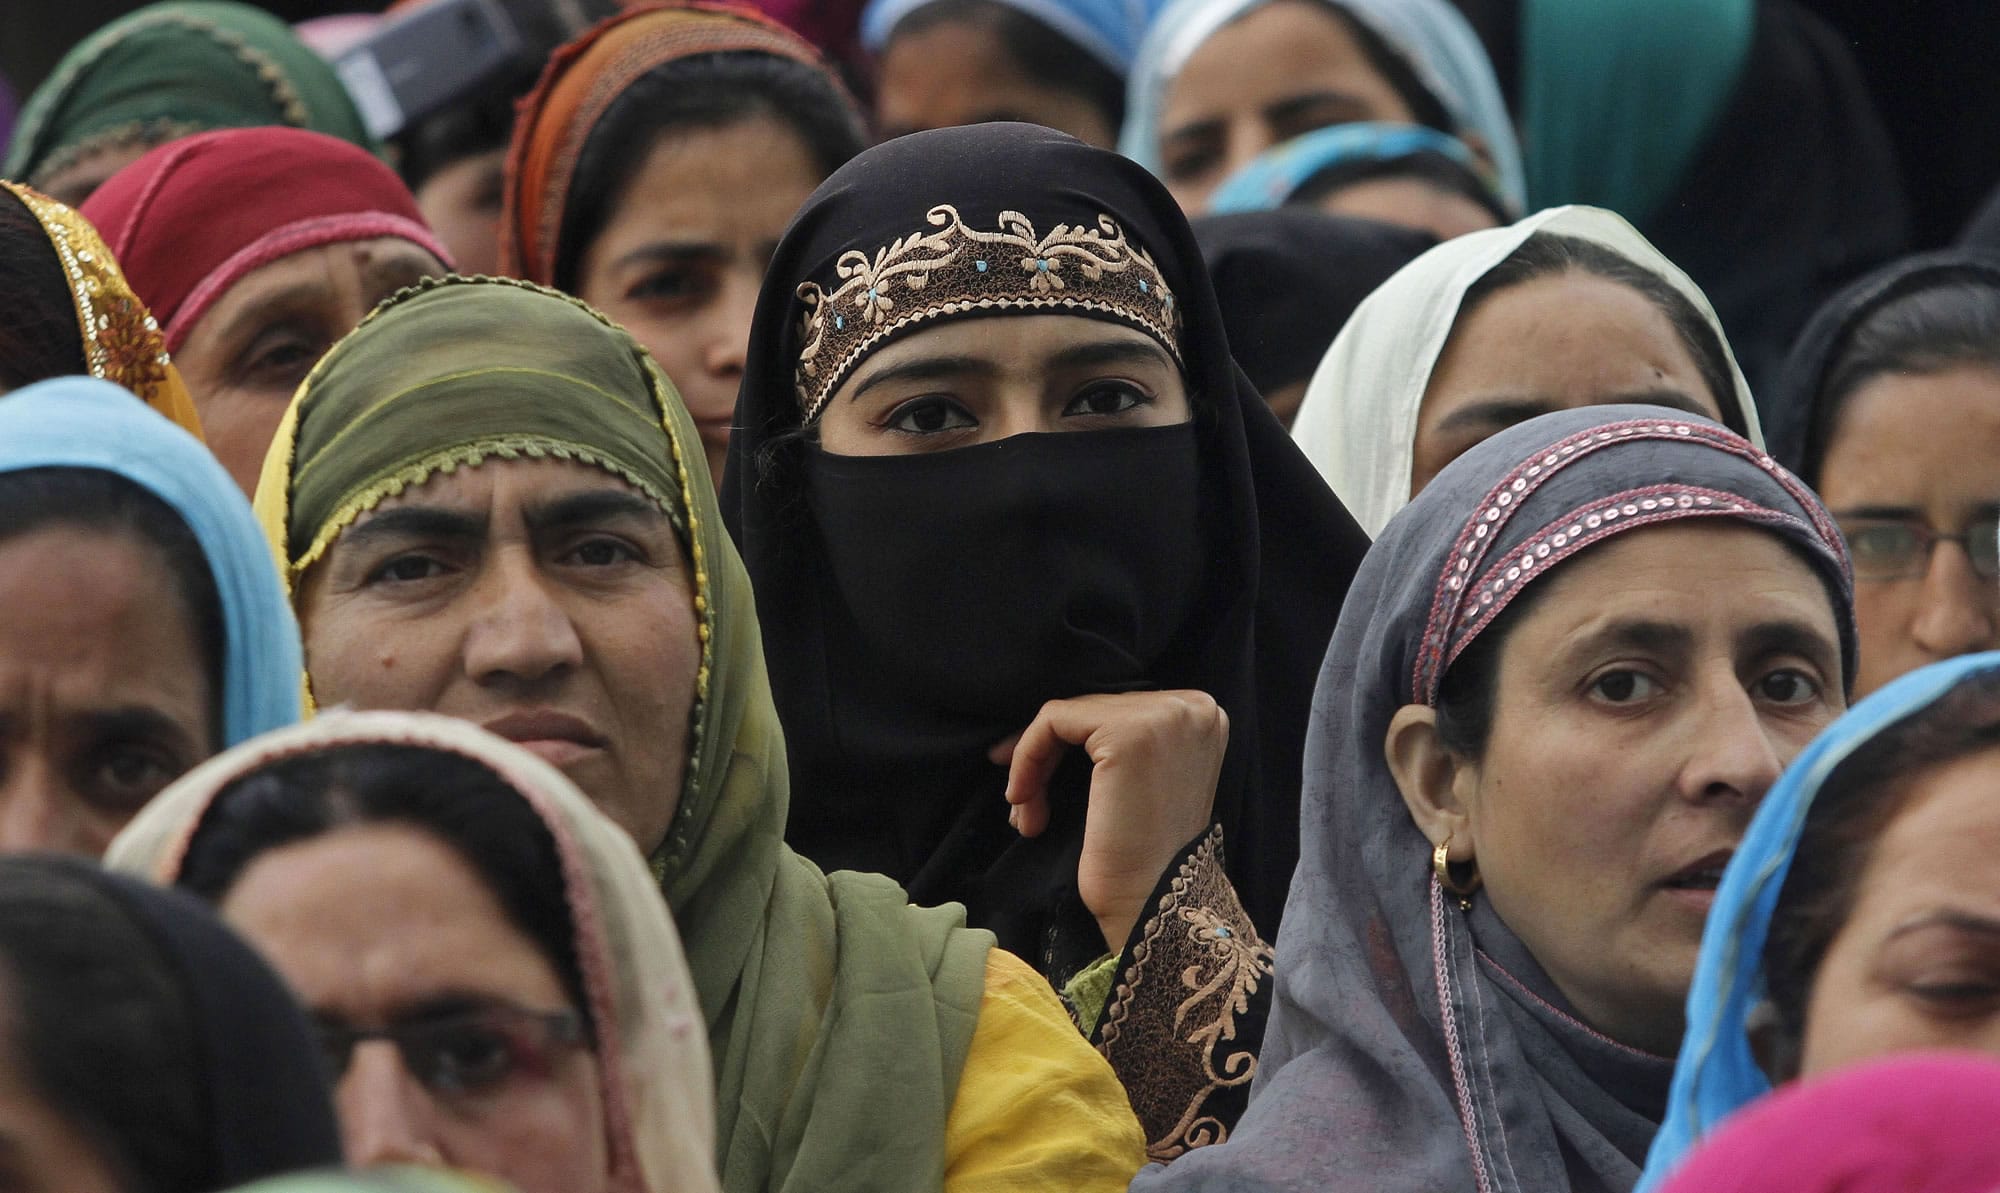 Kashmiri Muslim women workers of Accredited Social Health Activist attend a protest to mark May Day in Srinagar, India, on Wednesday.